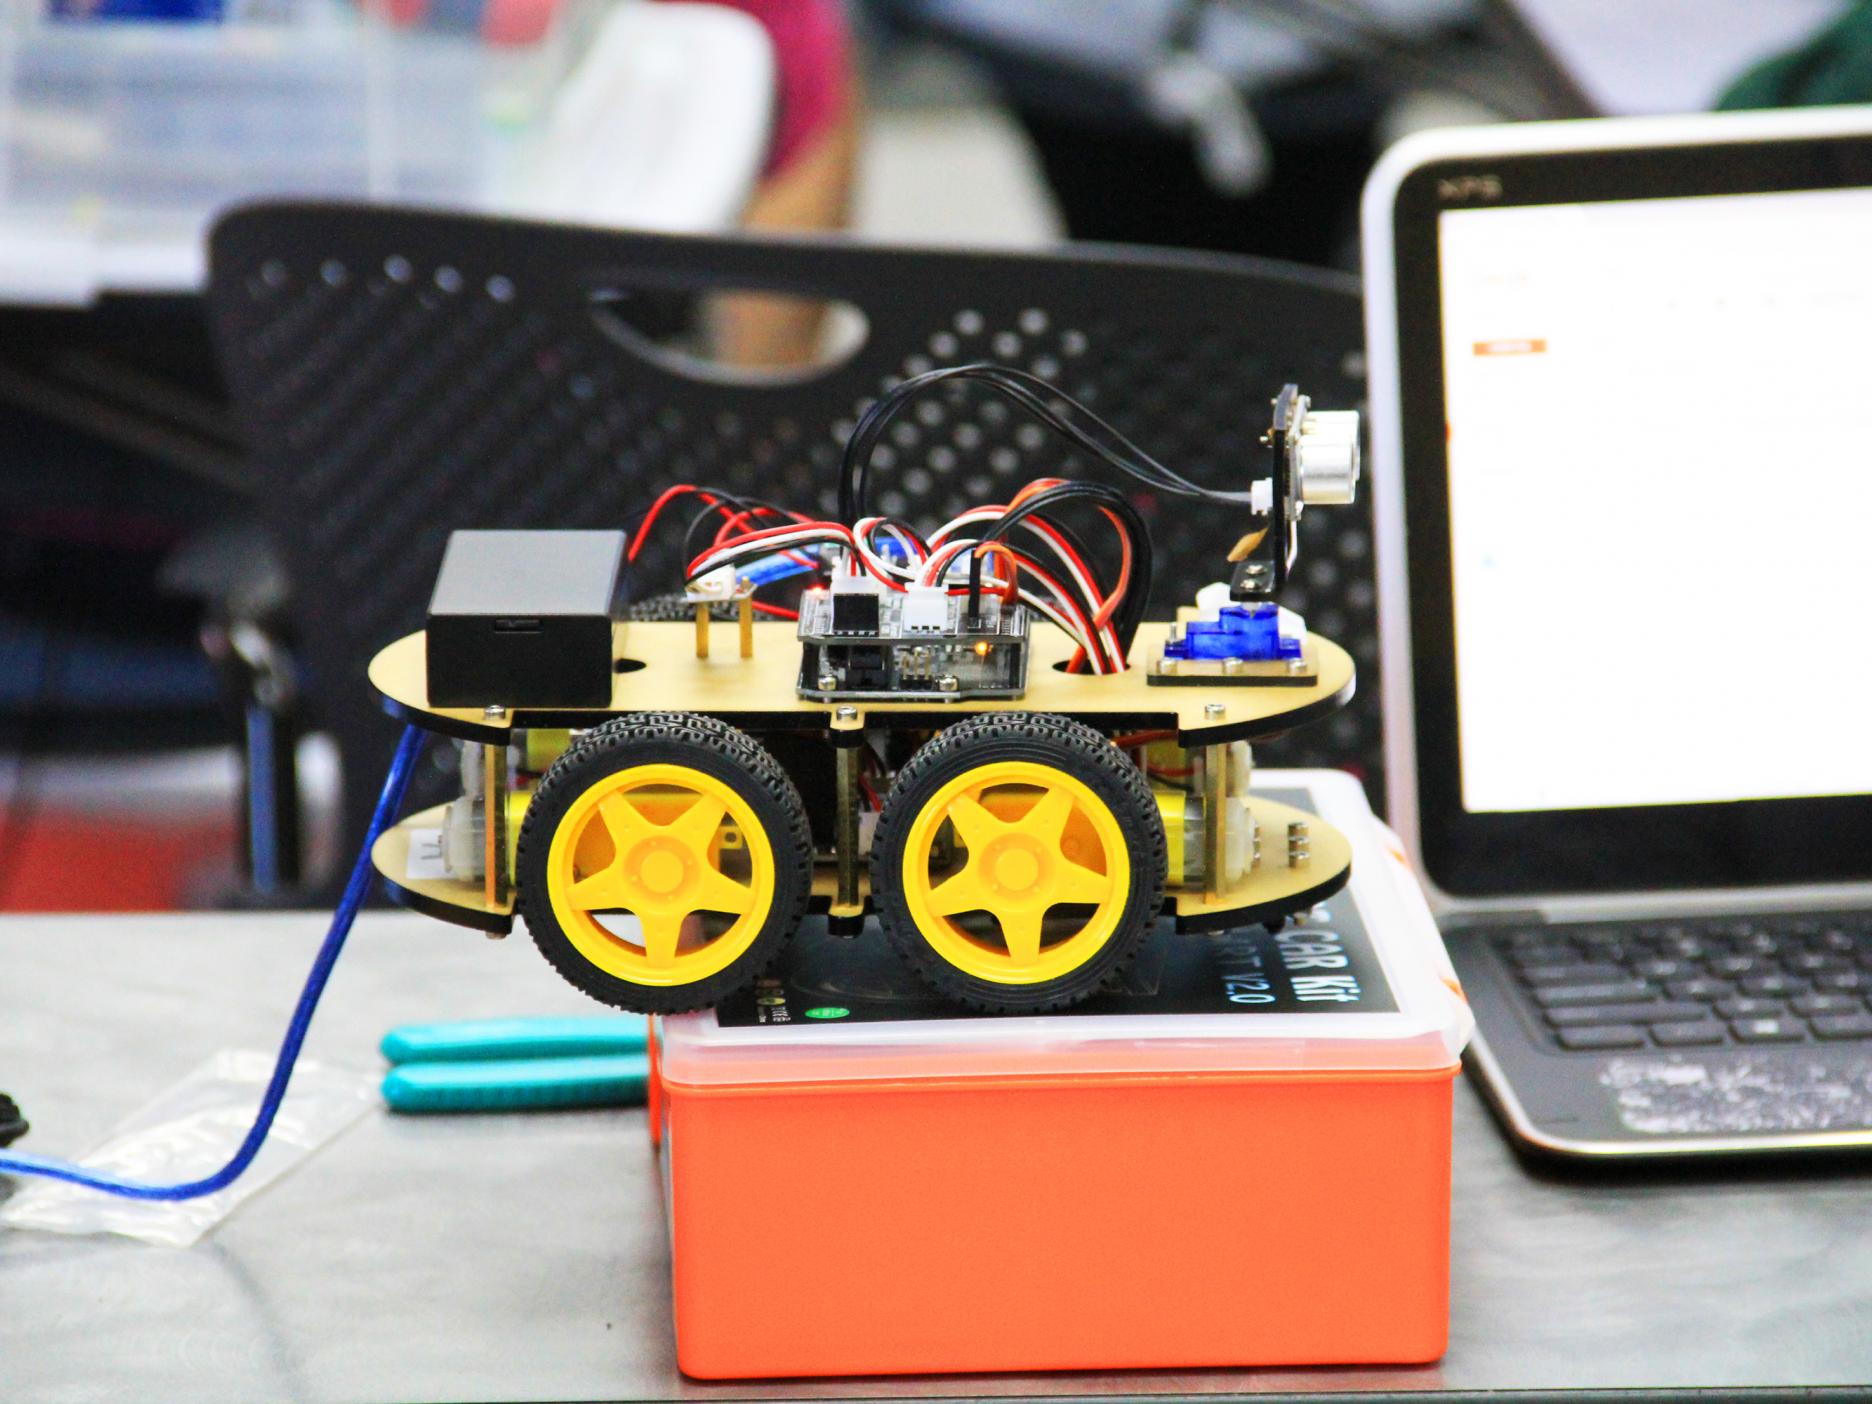 A small yellow robotic car sits on top of a work station.